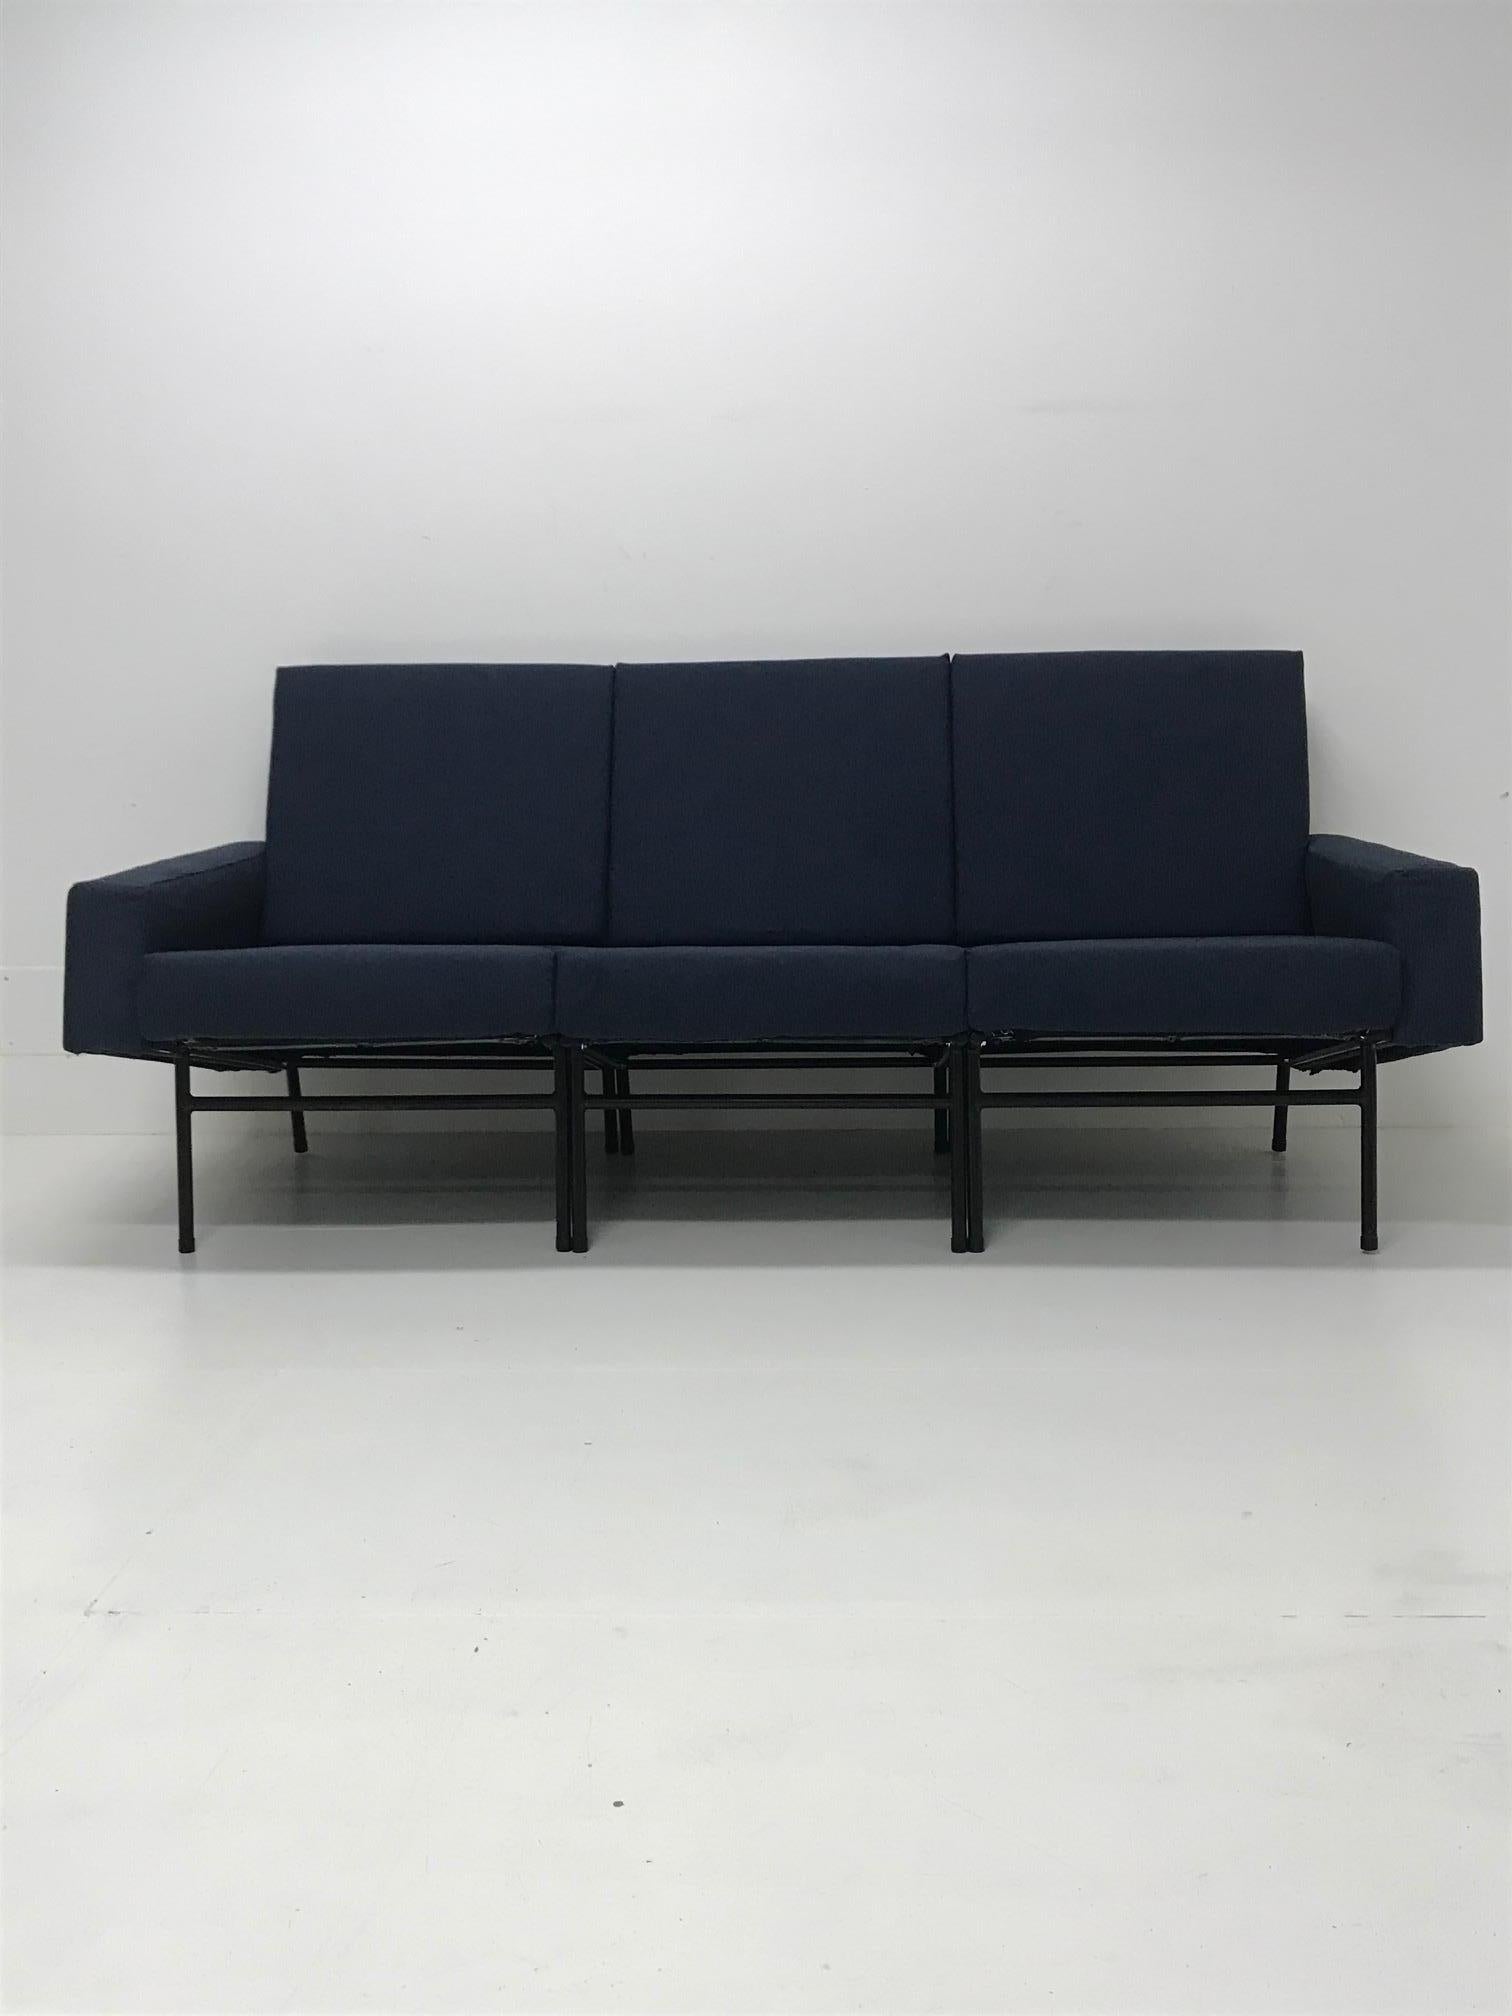 A three-seat sofa by Pierre Guariche for Airborne. Black enamelled steel structure. Newly restored in a royal blue fabric, France, 1950s.
  